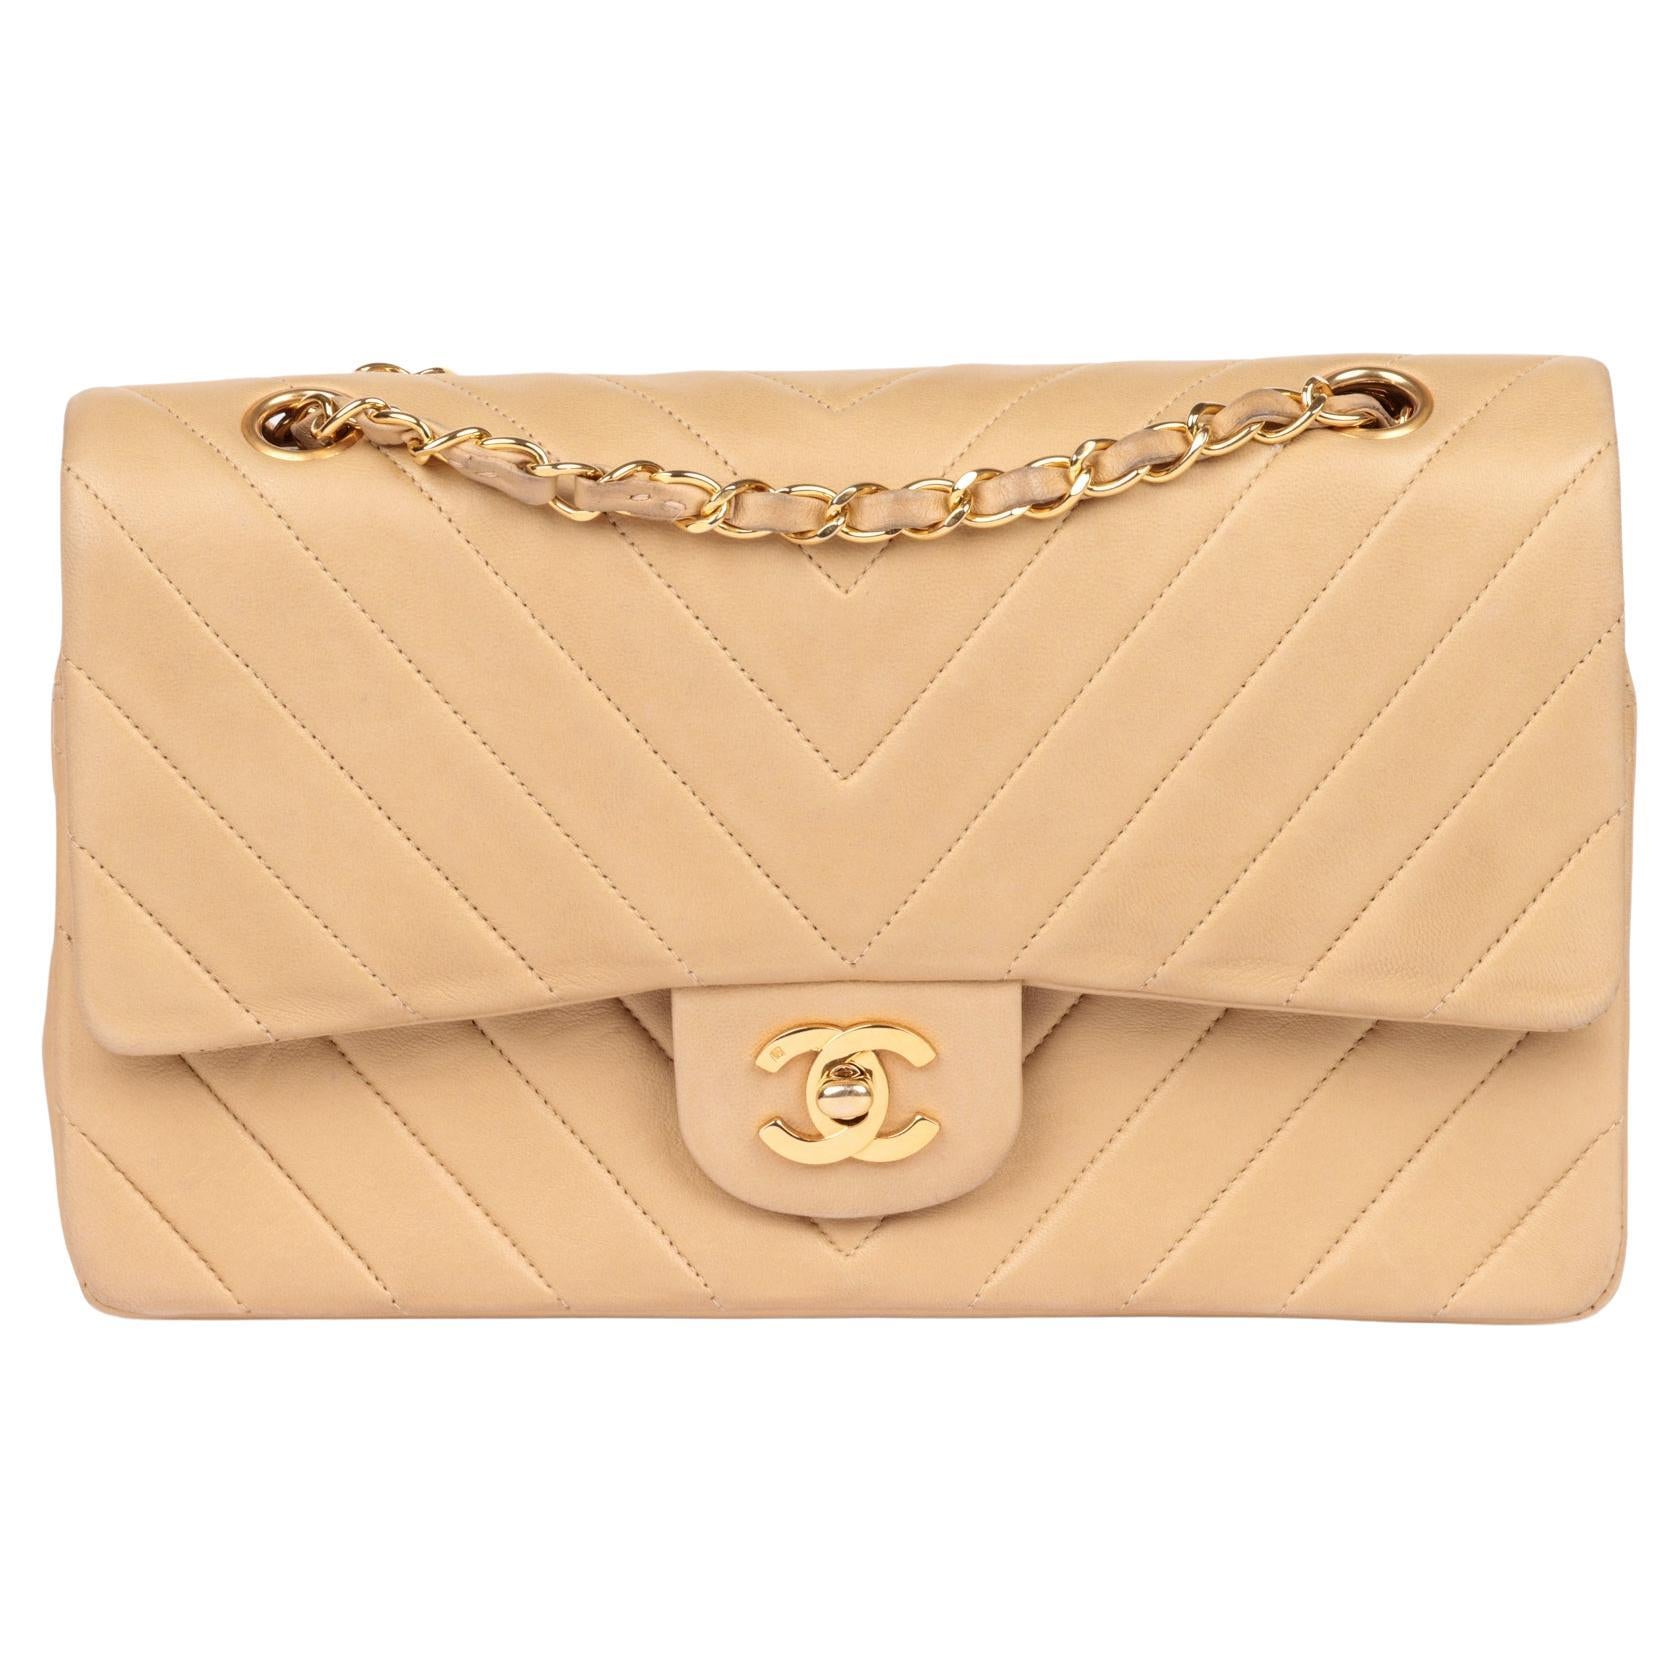 CHANEL Beige Chevron Quilted Lambskin Vintage Medium Classic Double Flap Bag